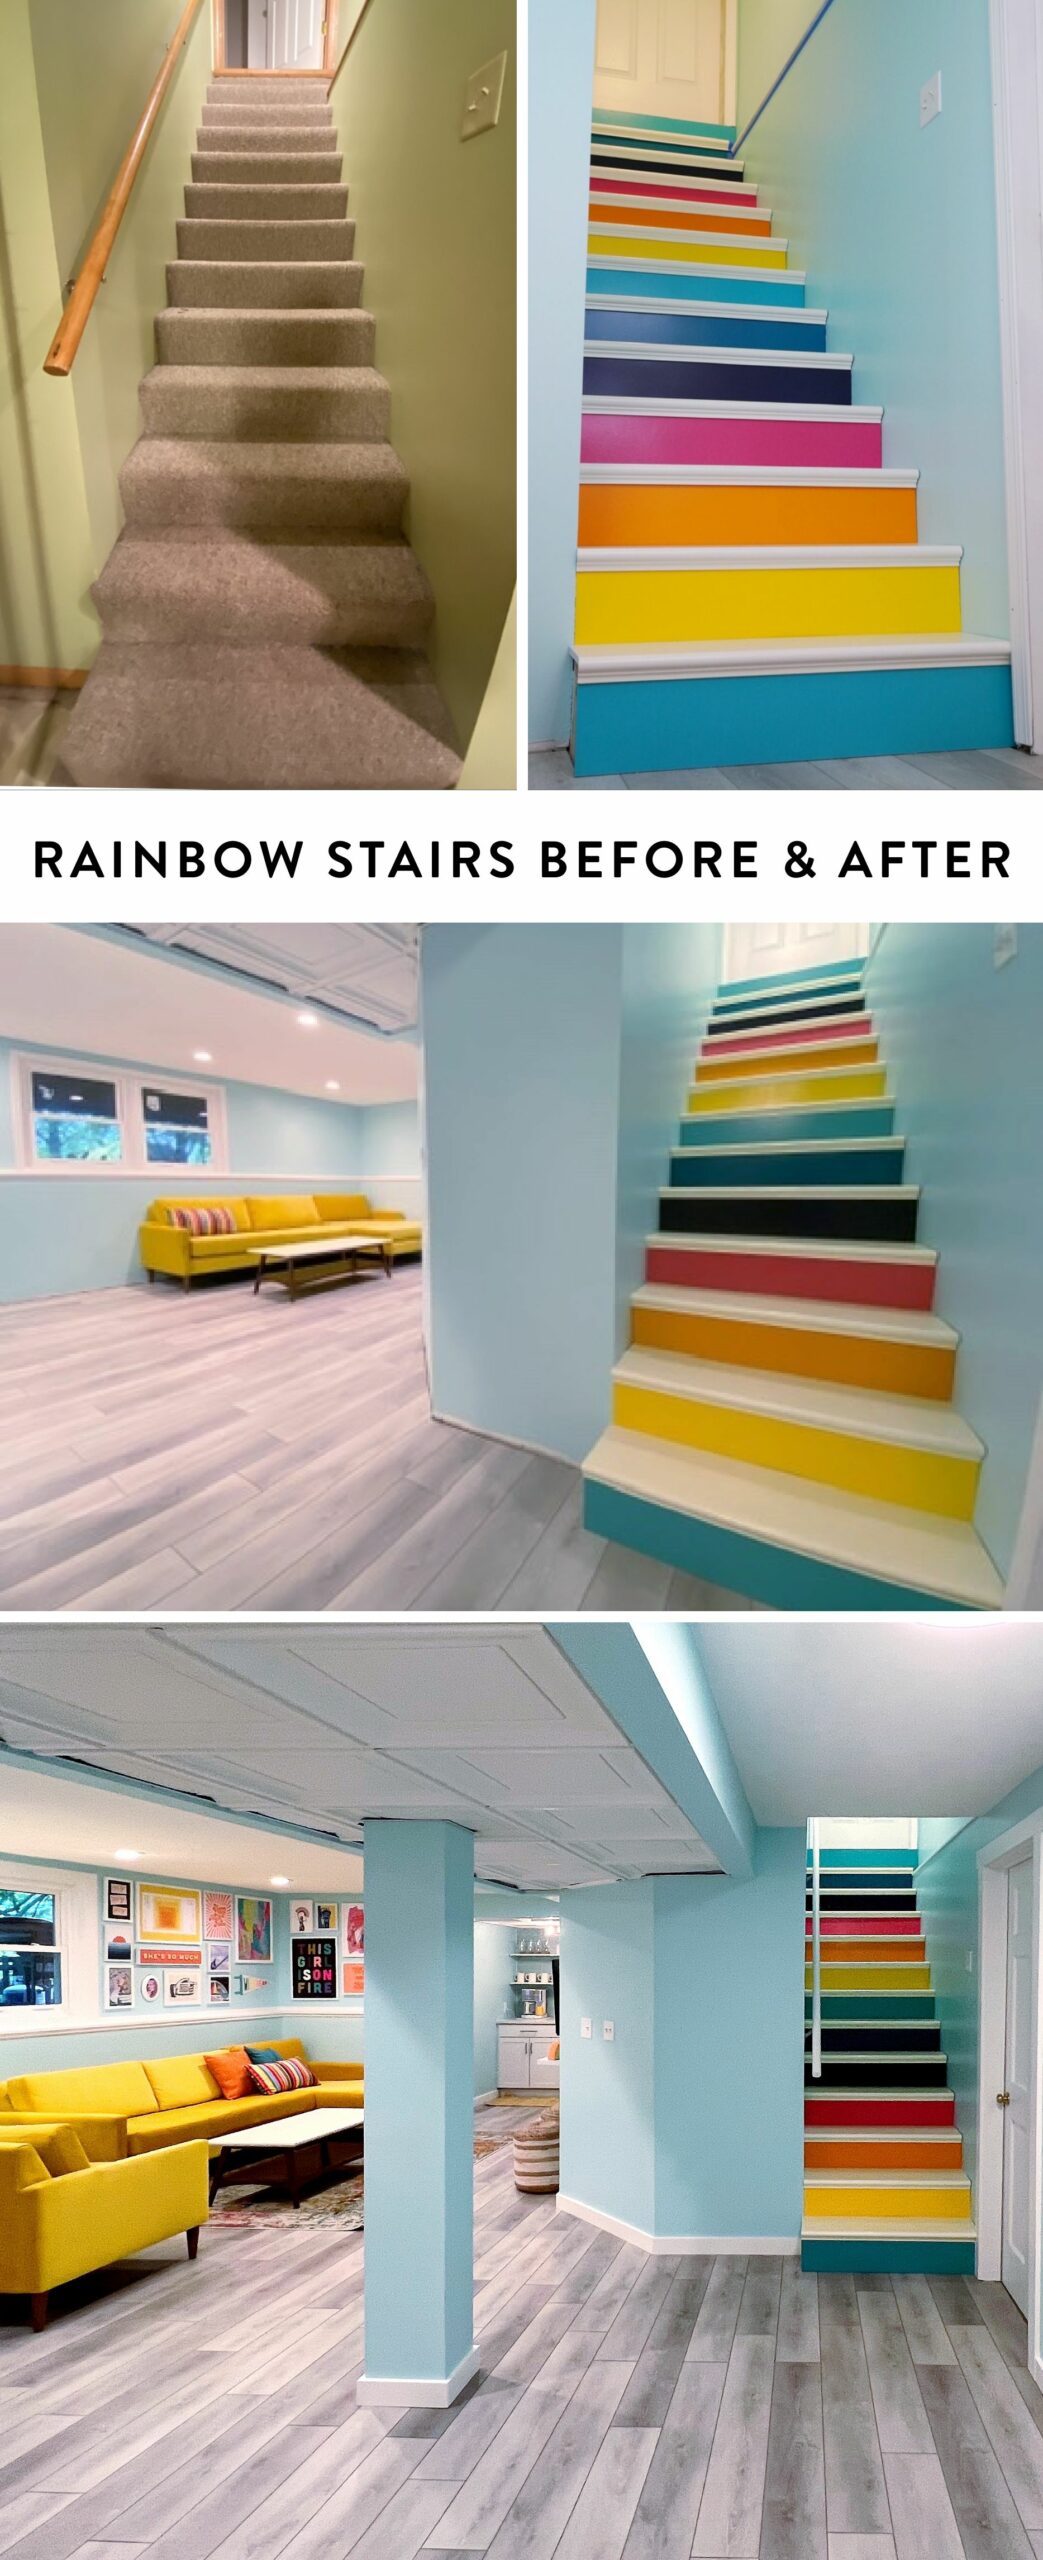 Rainbow stairs before and after - basement renovation for the Home Office Palace by Rachael Kay Albers, RKA INK